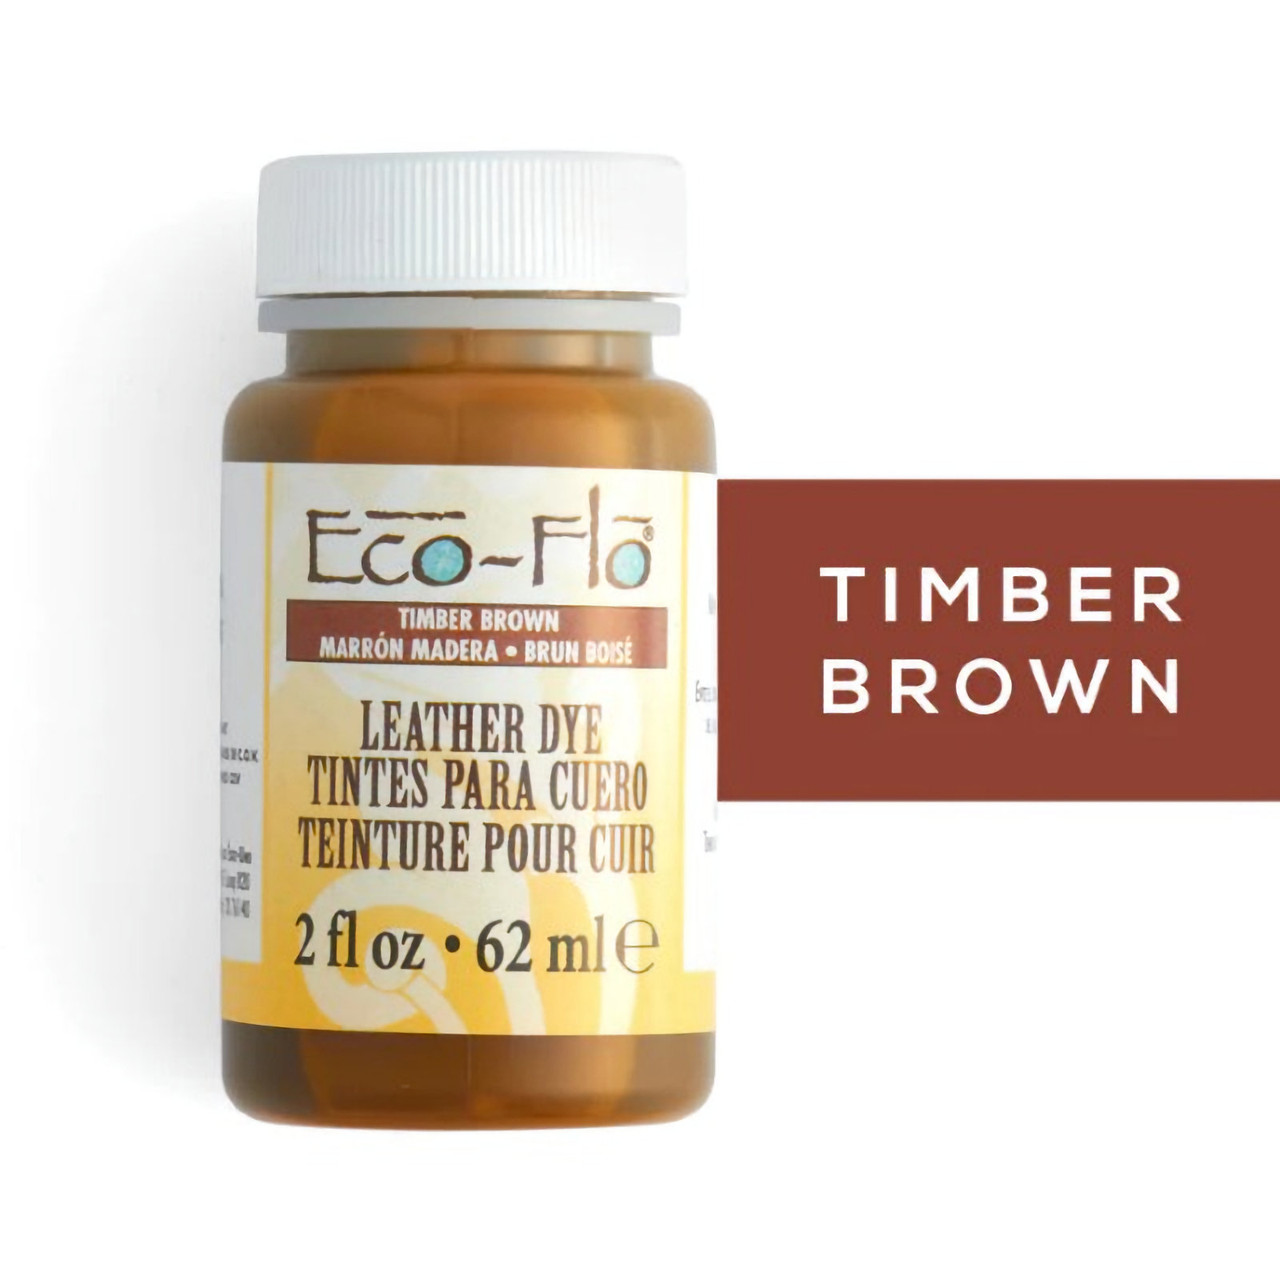 Eco Flo group 2 oz. bottle timber brown